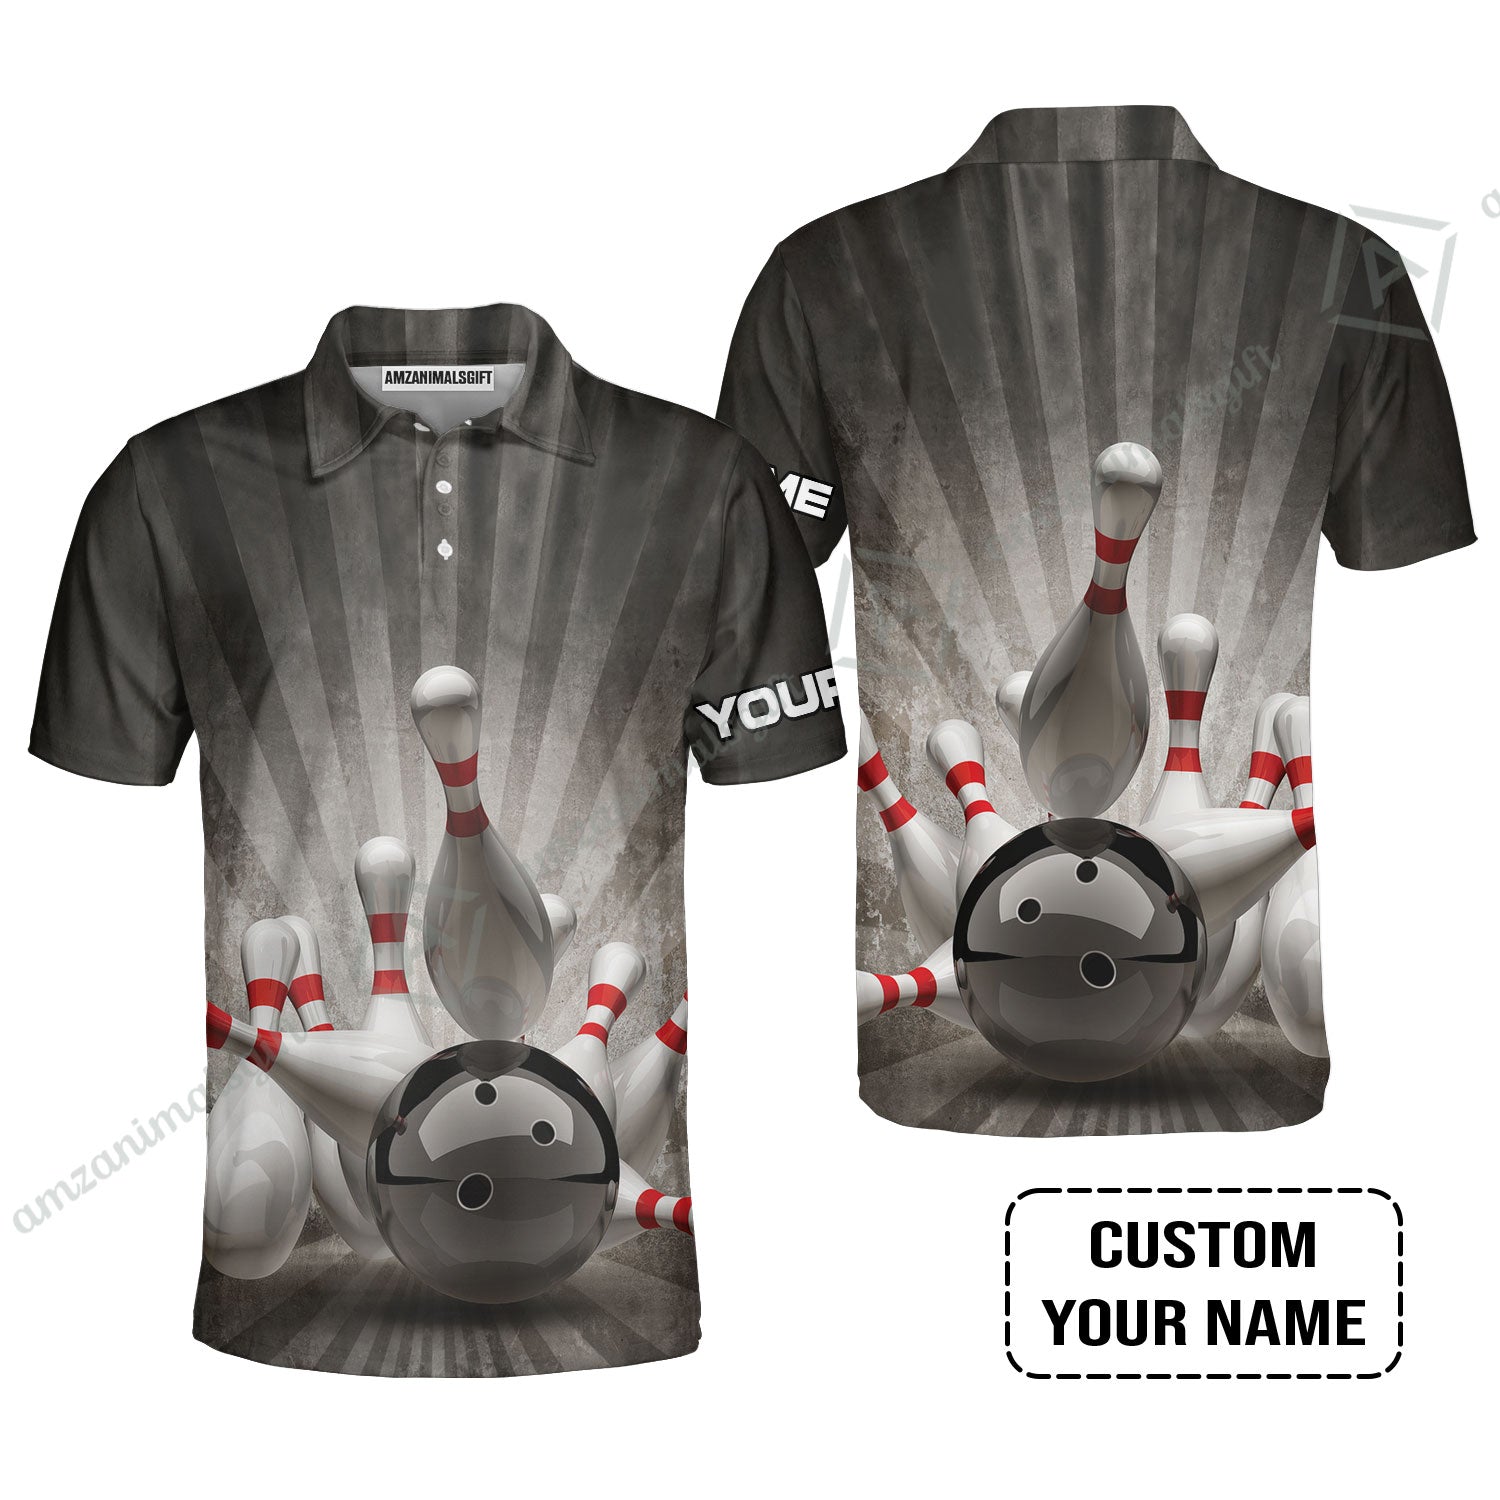 Bowling Short Sleeve Men Polo Shirt Customized Name, Colorful Bowling Pattern Polo Shirt, Perfect Outfits For Bowling Lovers, Bowlers